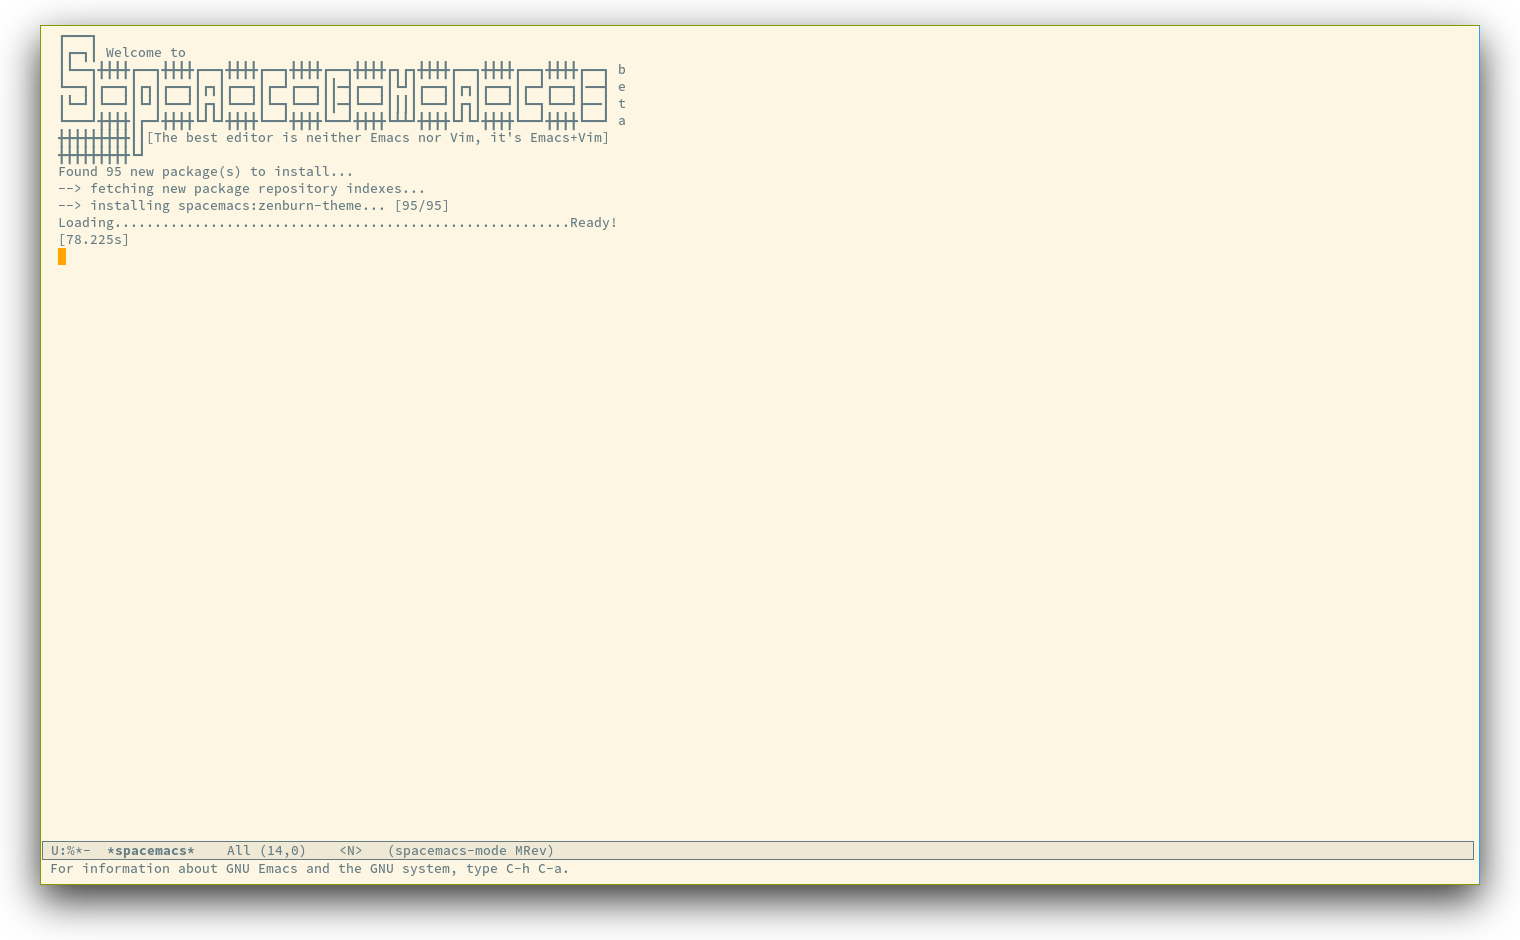 /TakeV/spacemacs/media/commit/fba874d64d2c6eb3239b68d226a49936ecf27e4e/doc/img/spacemacs-startup.png